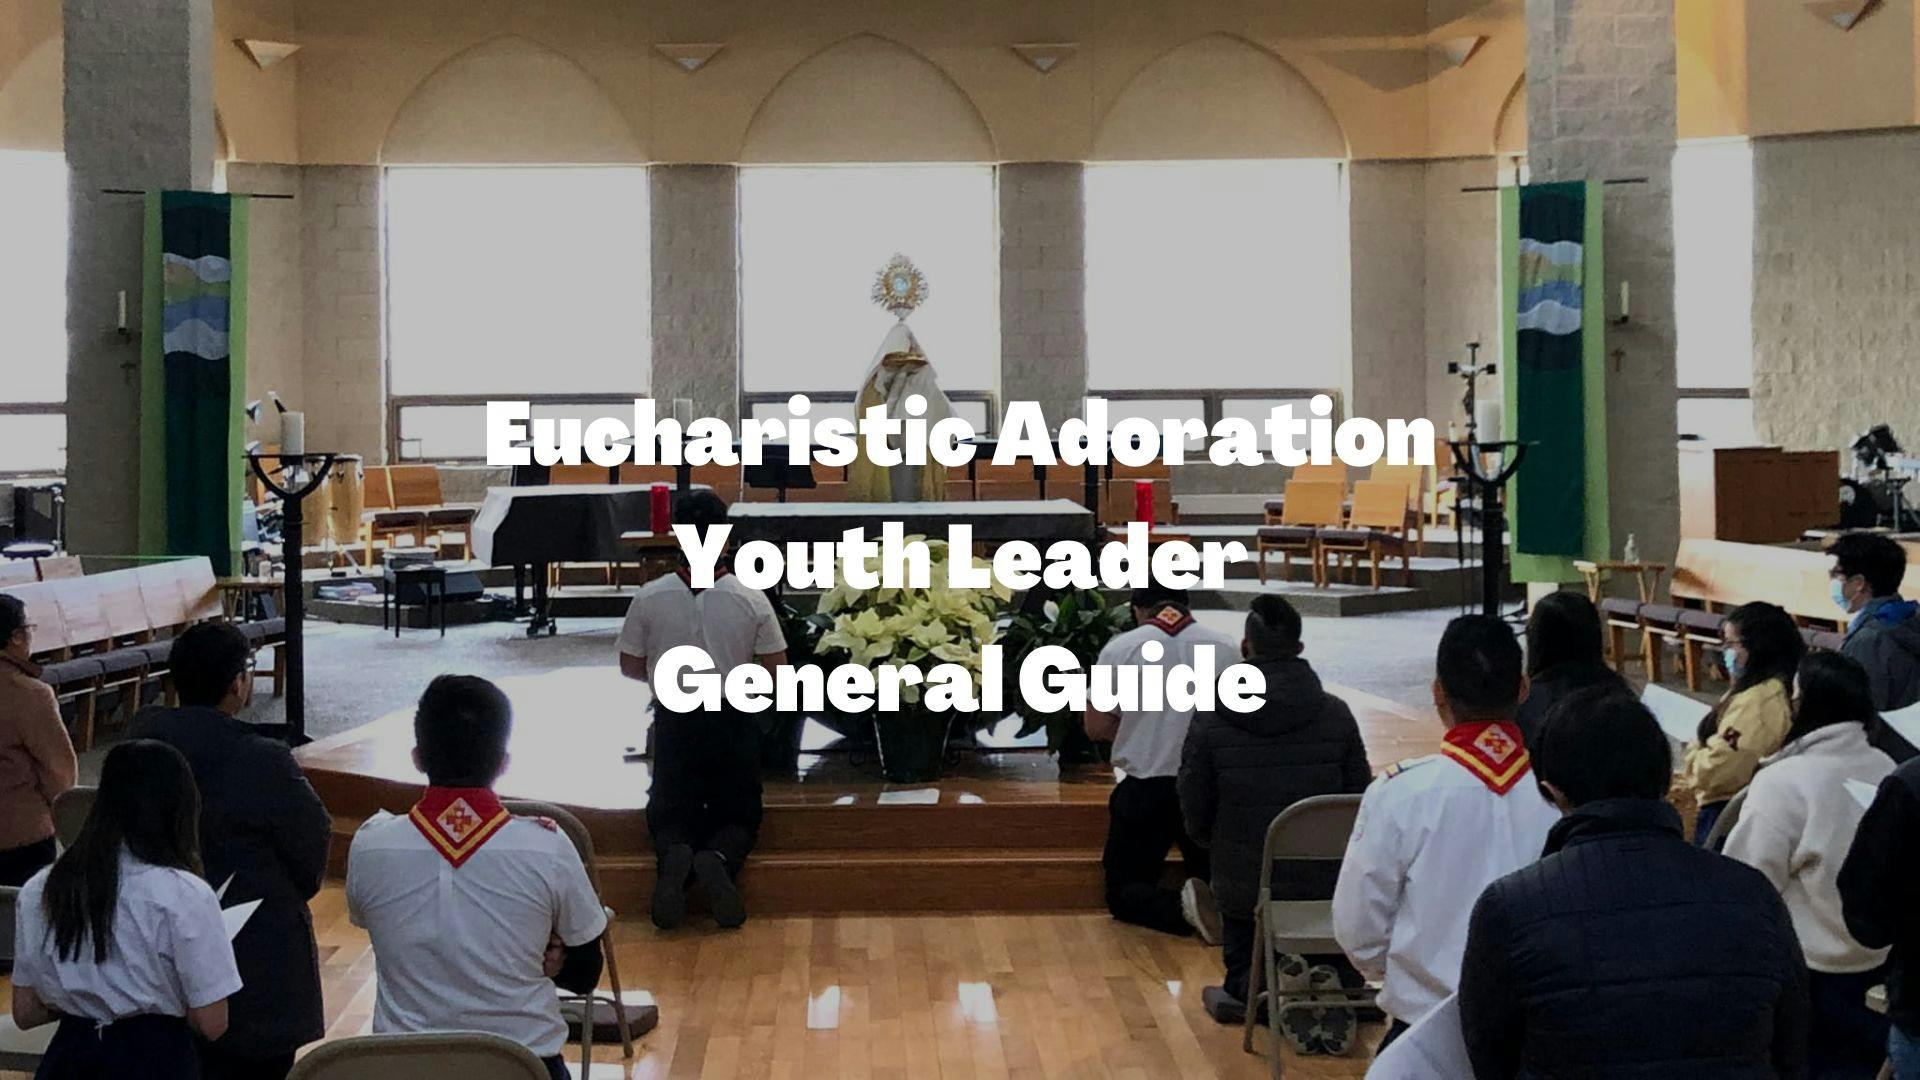 General Eucharistic Adoration Guide for Youth Leaders